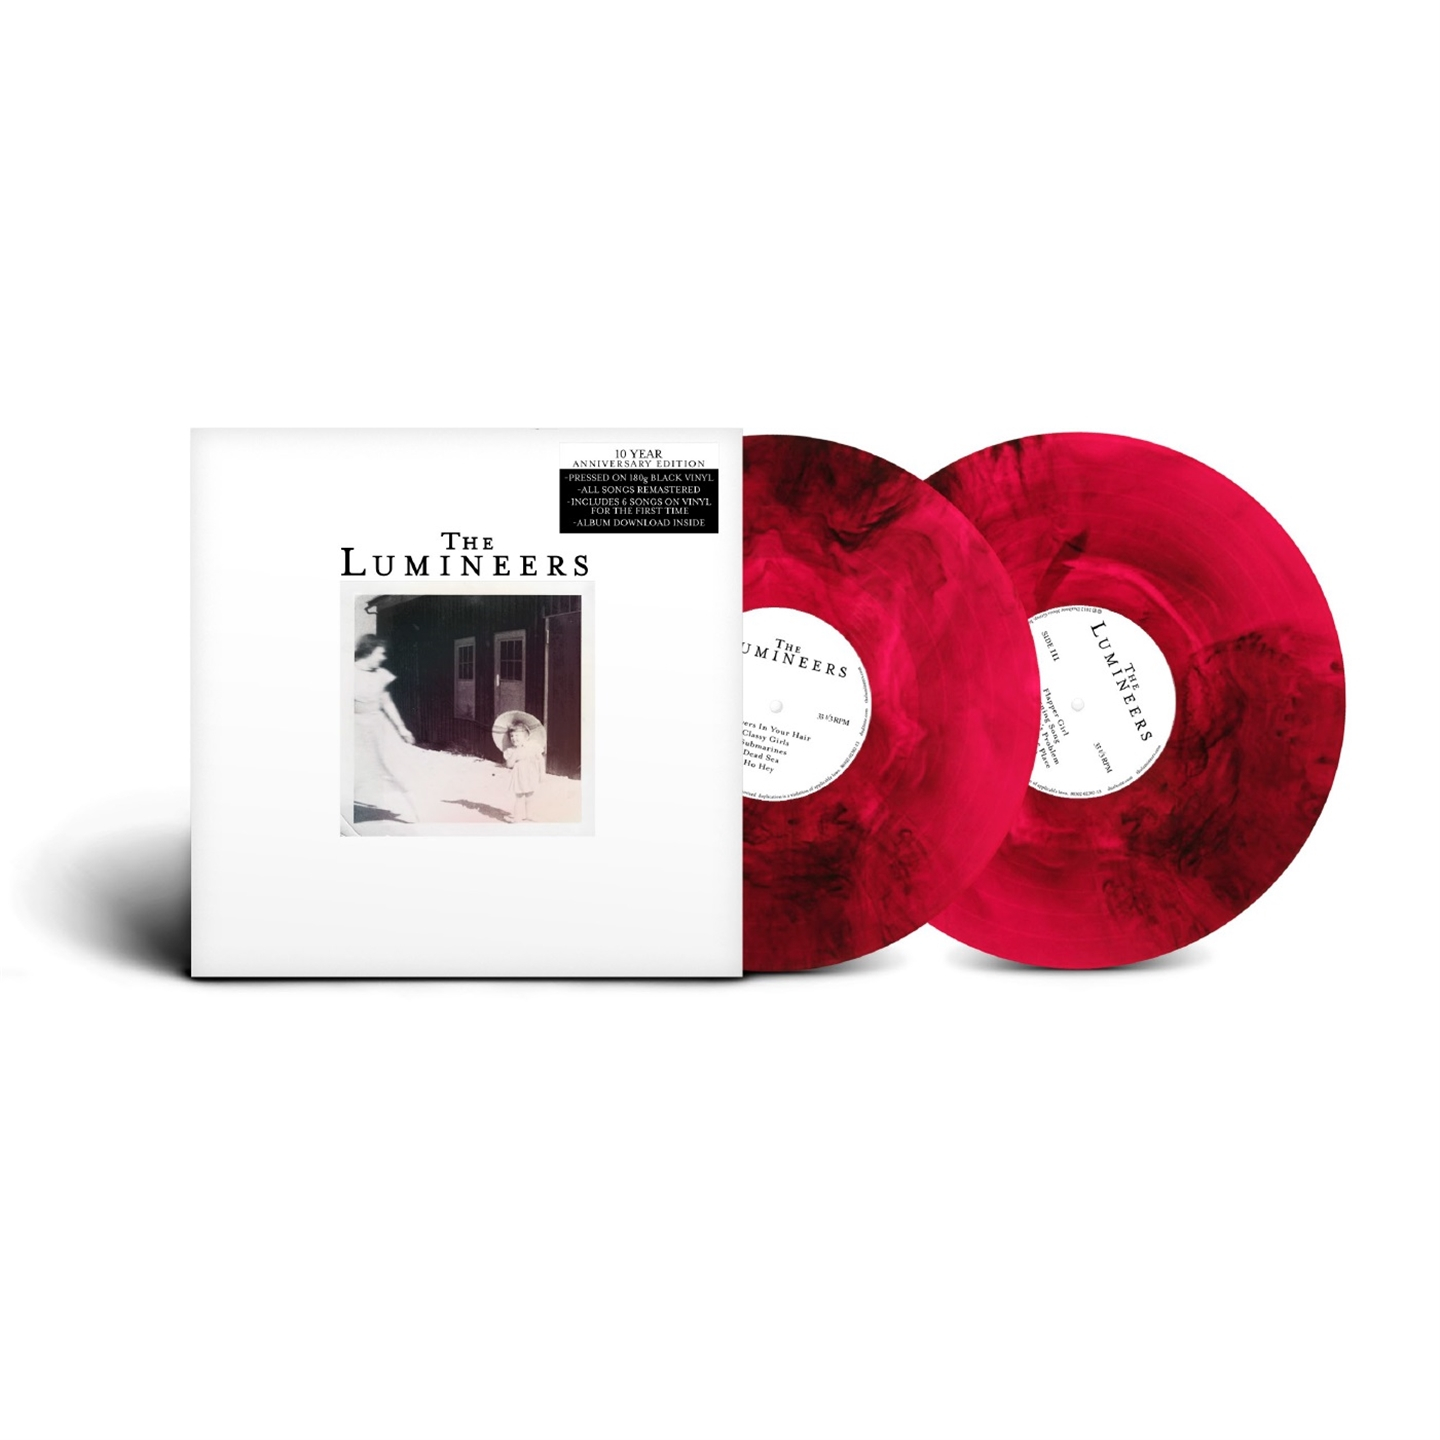 THE LUMINEERS 10TH ANNIVERSARY EDITION - COLORED VINYL INDIE EXCLUSIVE LTD. ED.